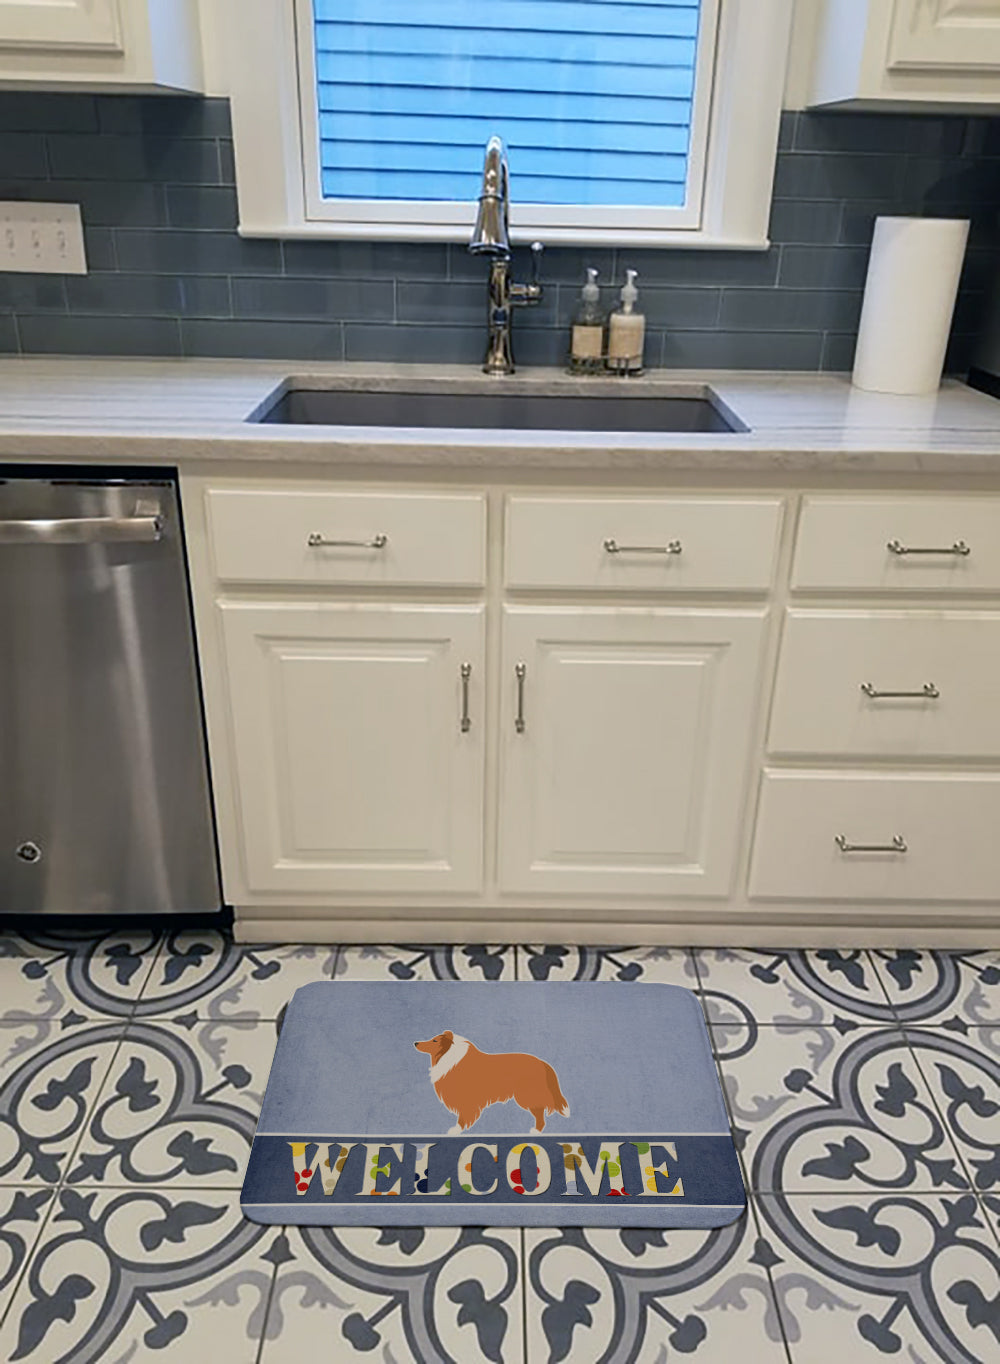 Collie Welcome Machine Washable Memory Foam Mat BB5520RUG - the-store.com